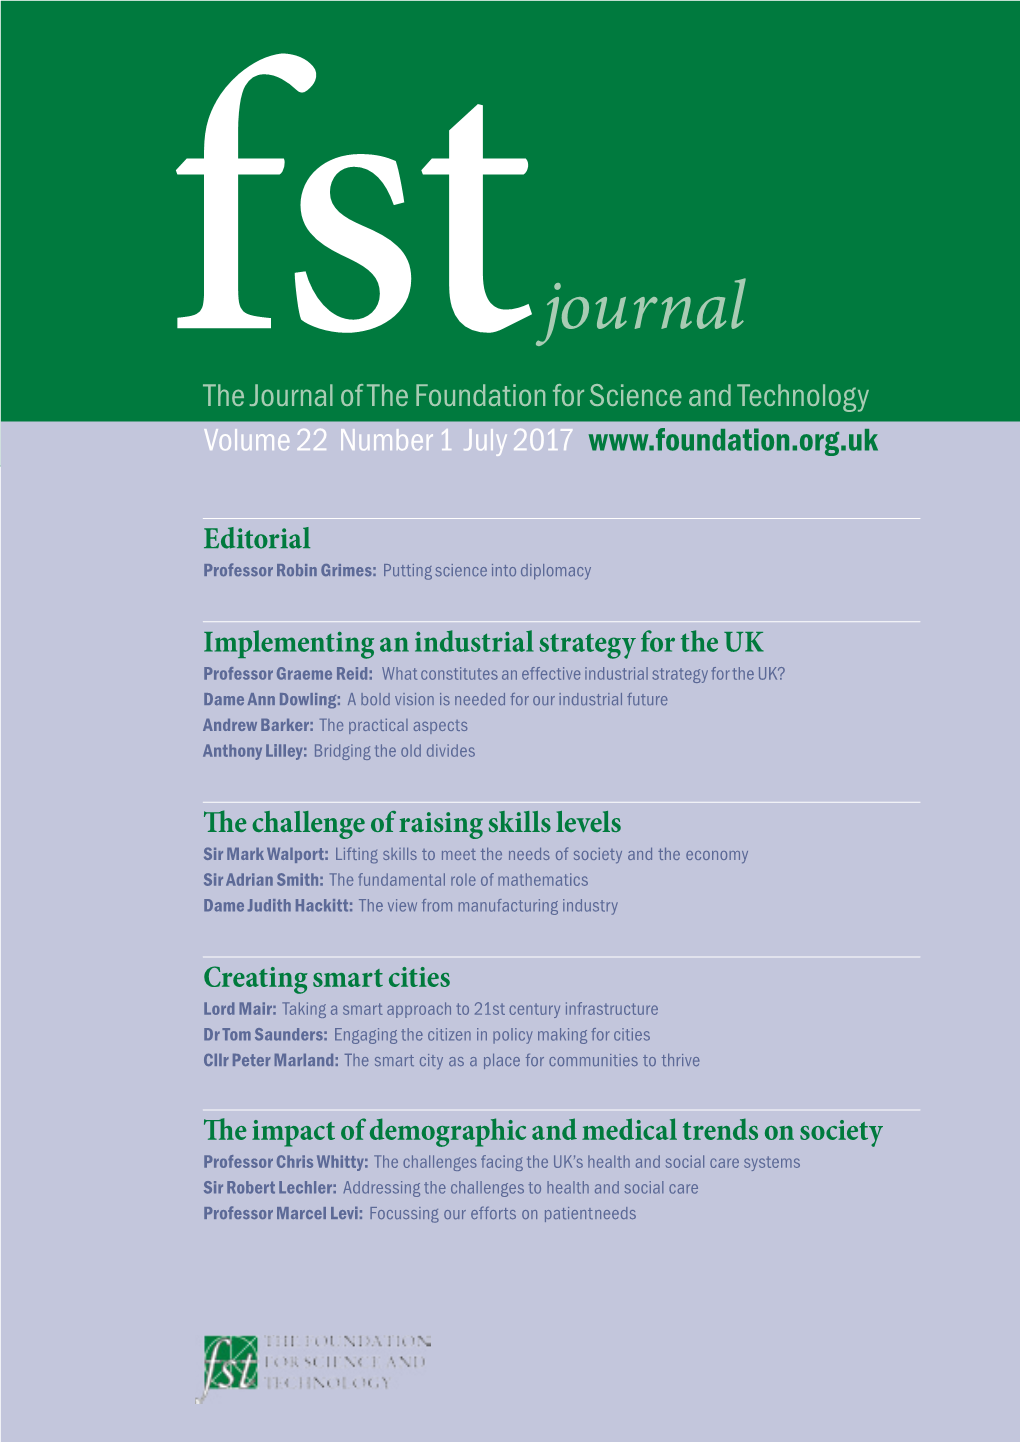 Fstjournal@Foundation.Org.Uk Institute of Physics, a Not-For-Profit Society